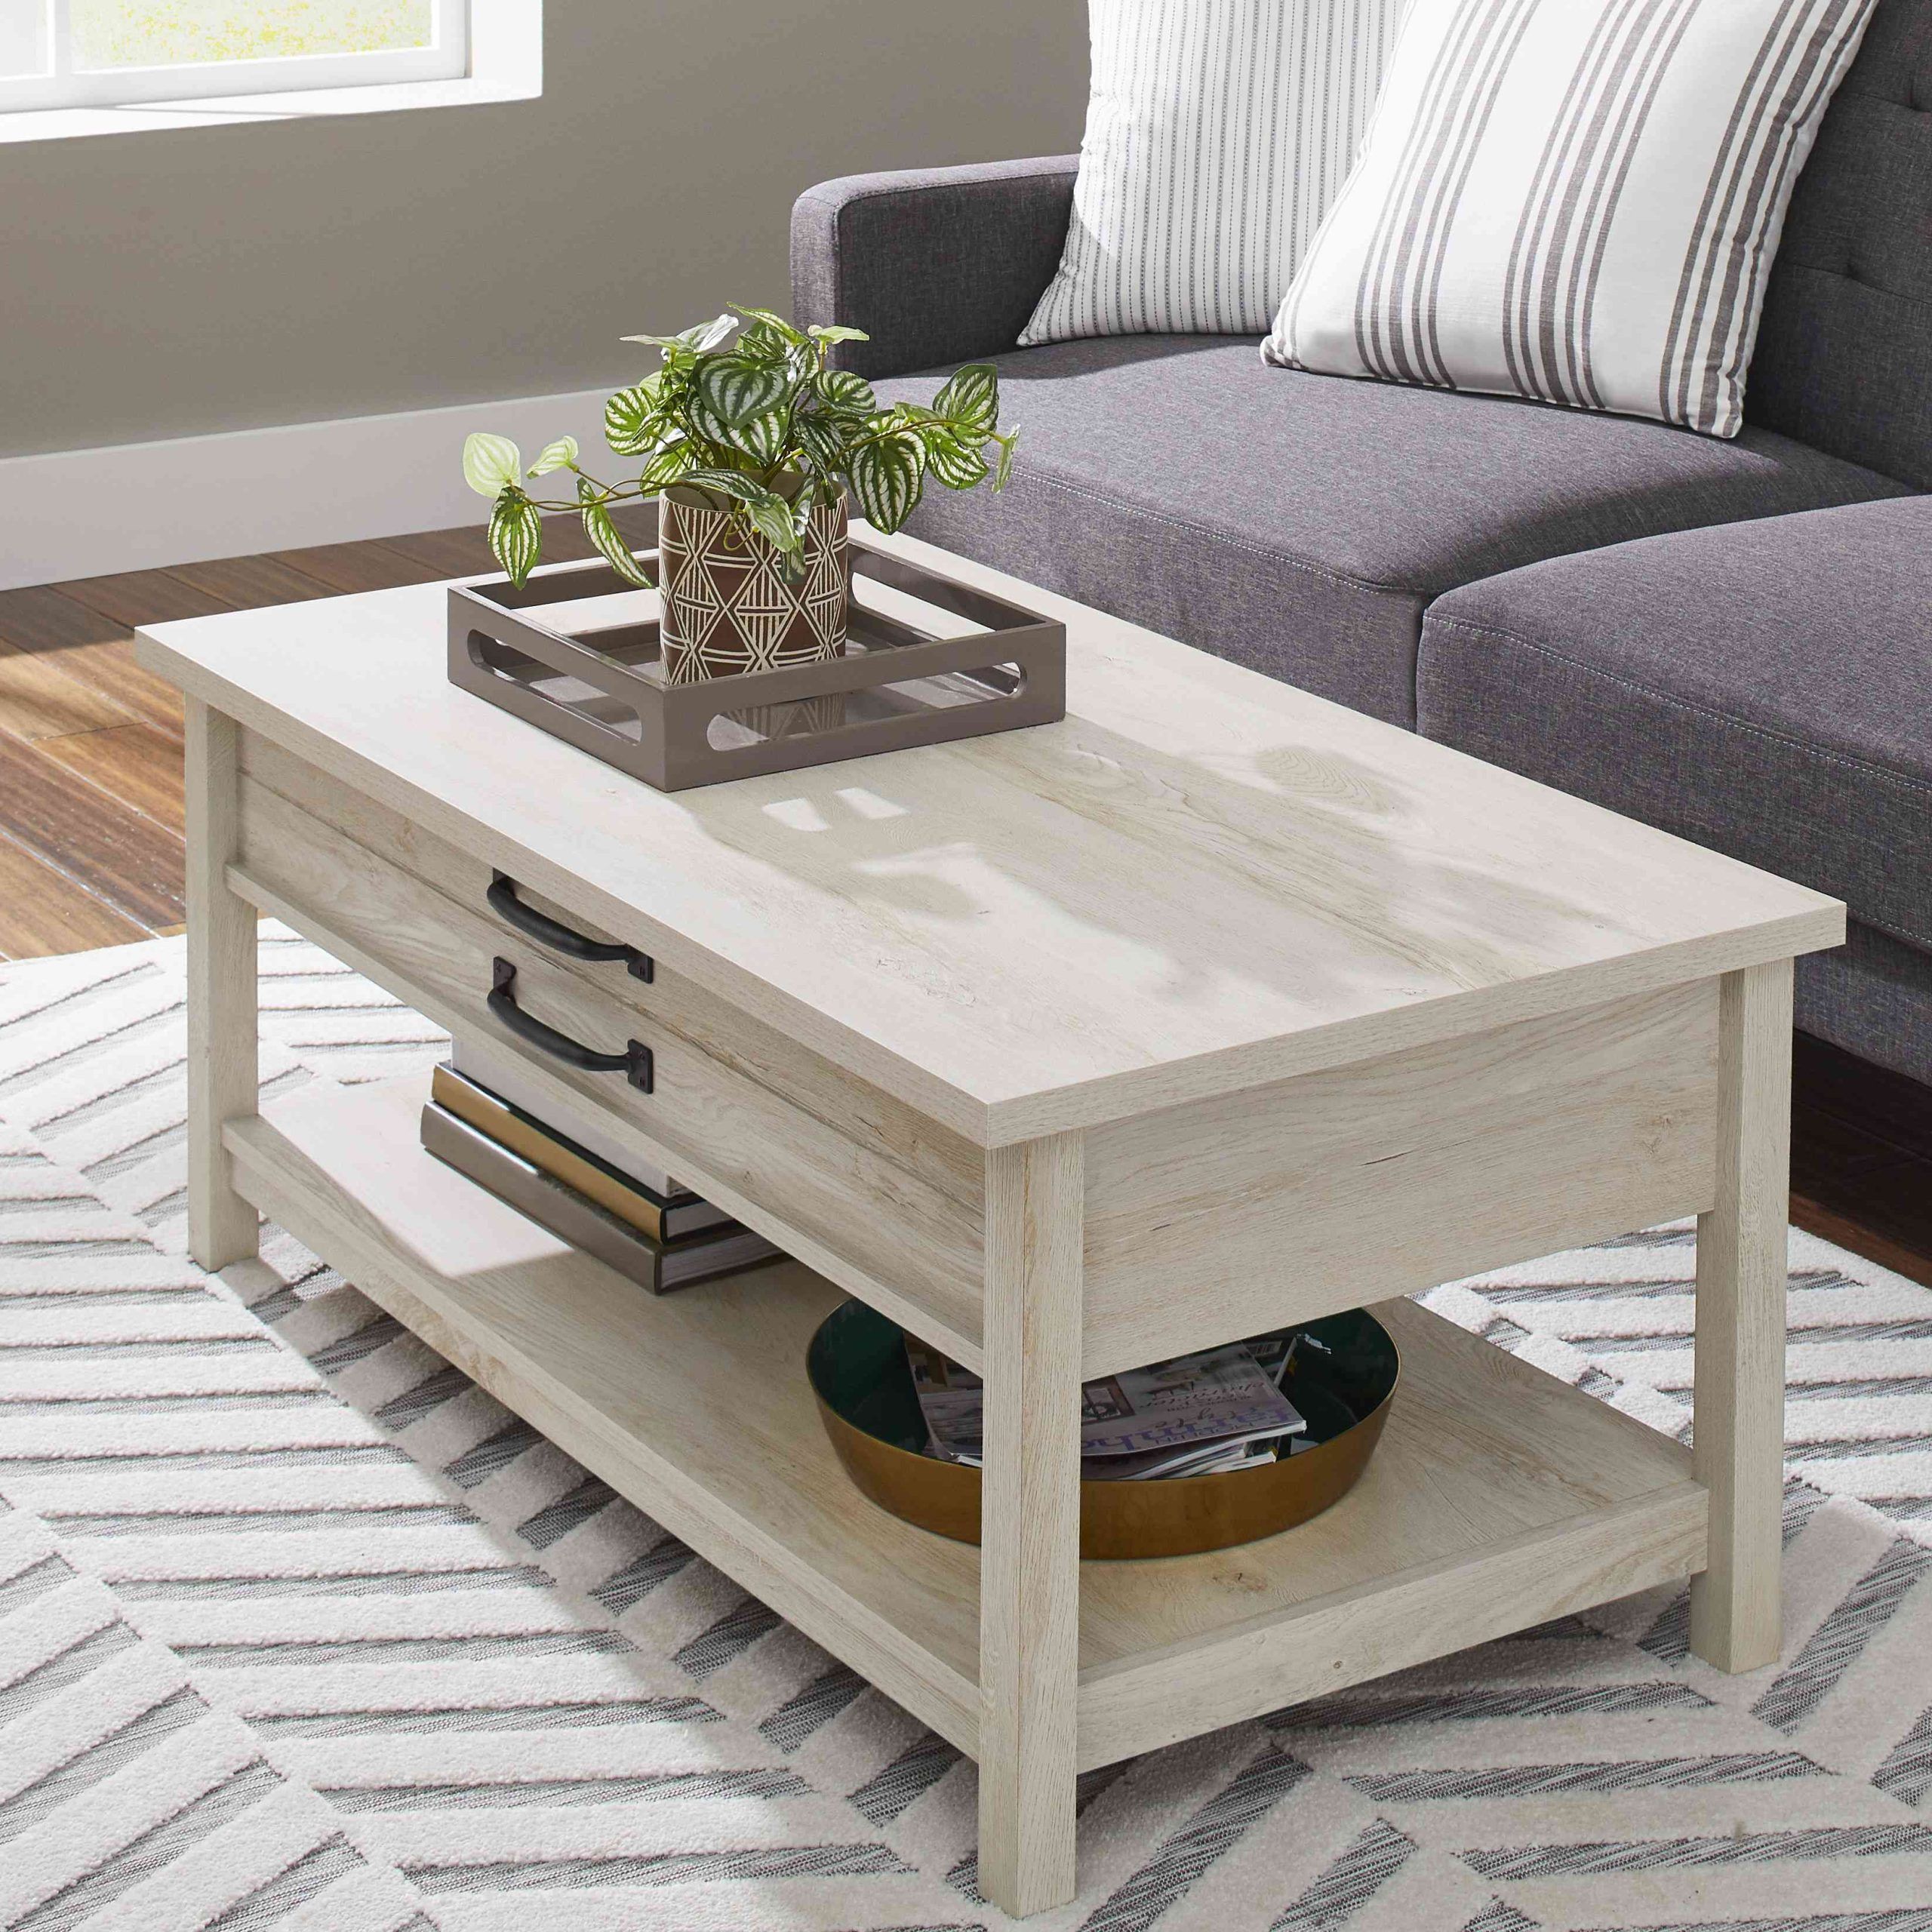 The 9 Best Lift Top Coffee Tables Of 2022 With Regard To Wood Lift Top Coffee Tables (View 11 of 15)